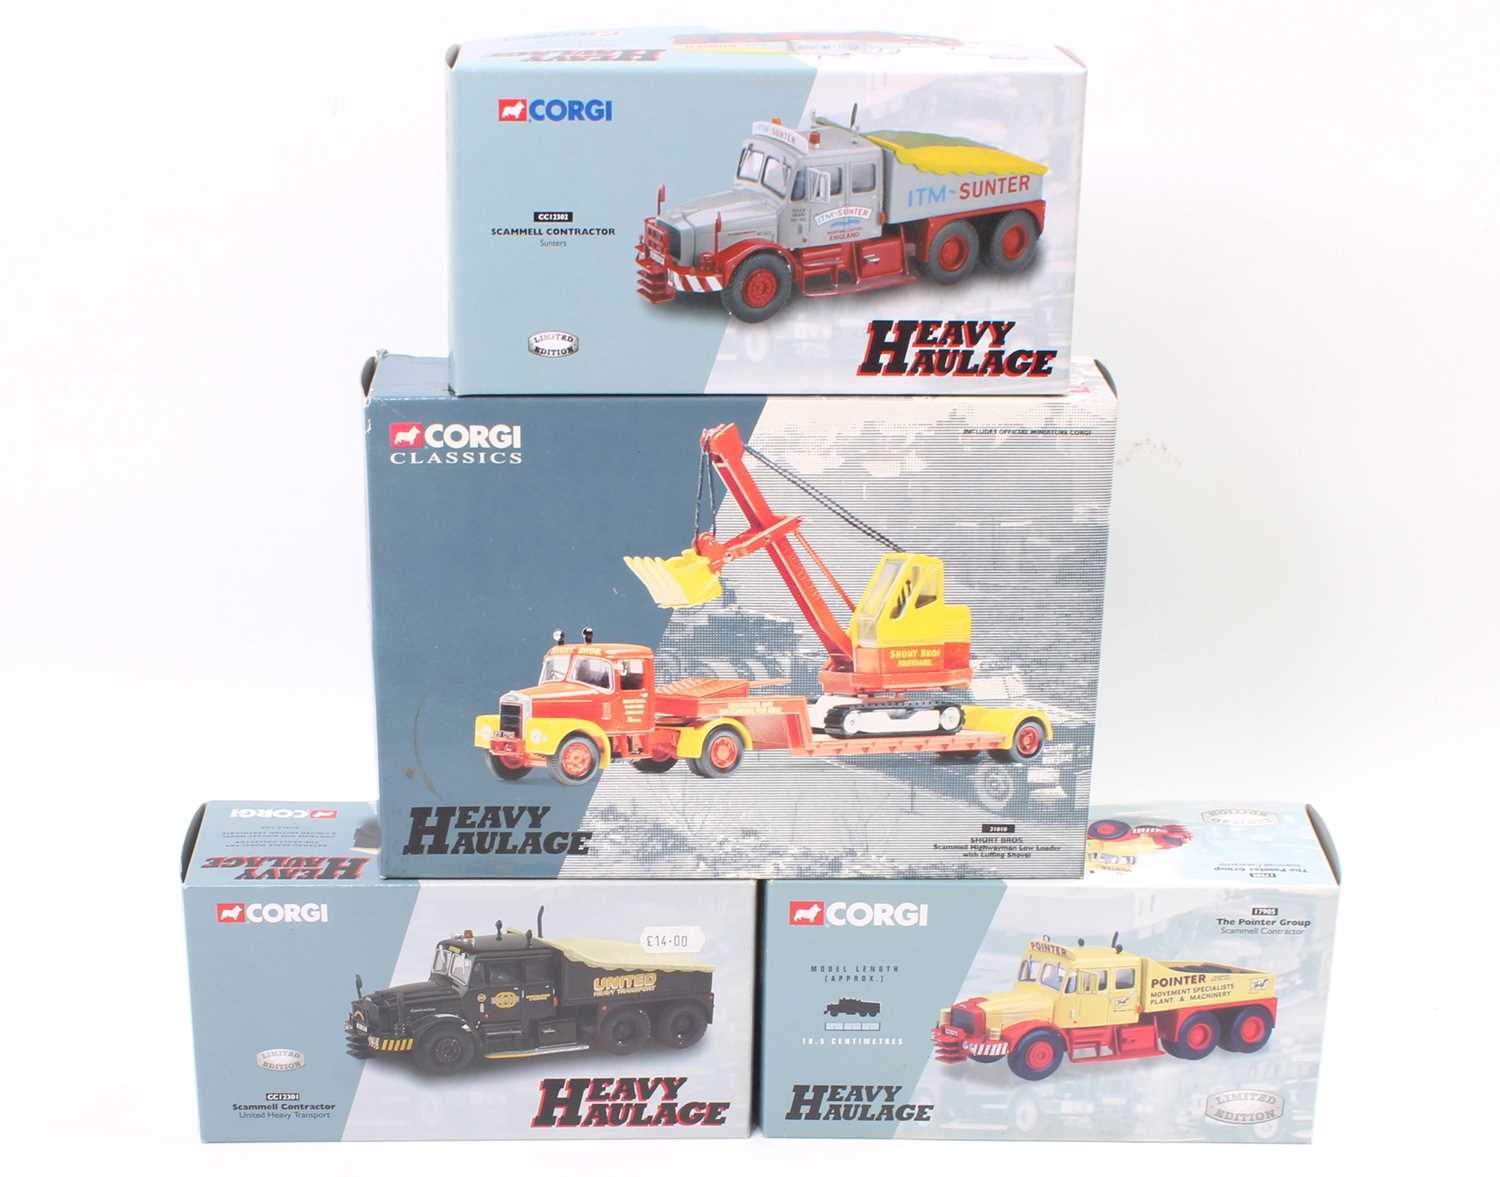 Corgi Toys Heavy Haulage 1/50th scale boxed group of 4 to include Ref.Nos. CC12301, CC12302, 17905